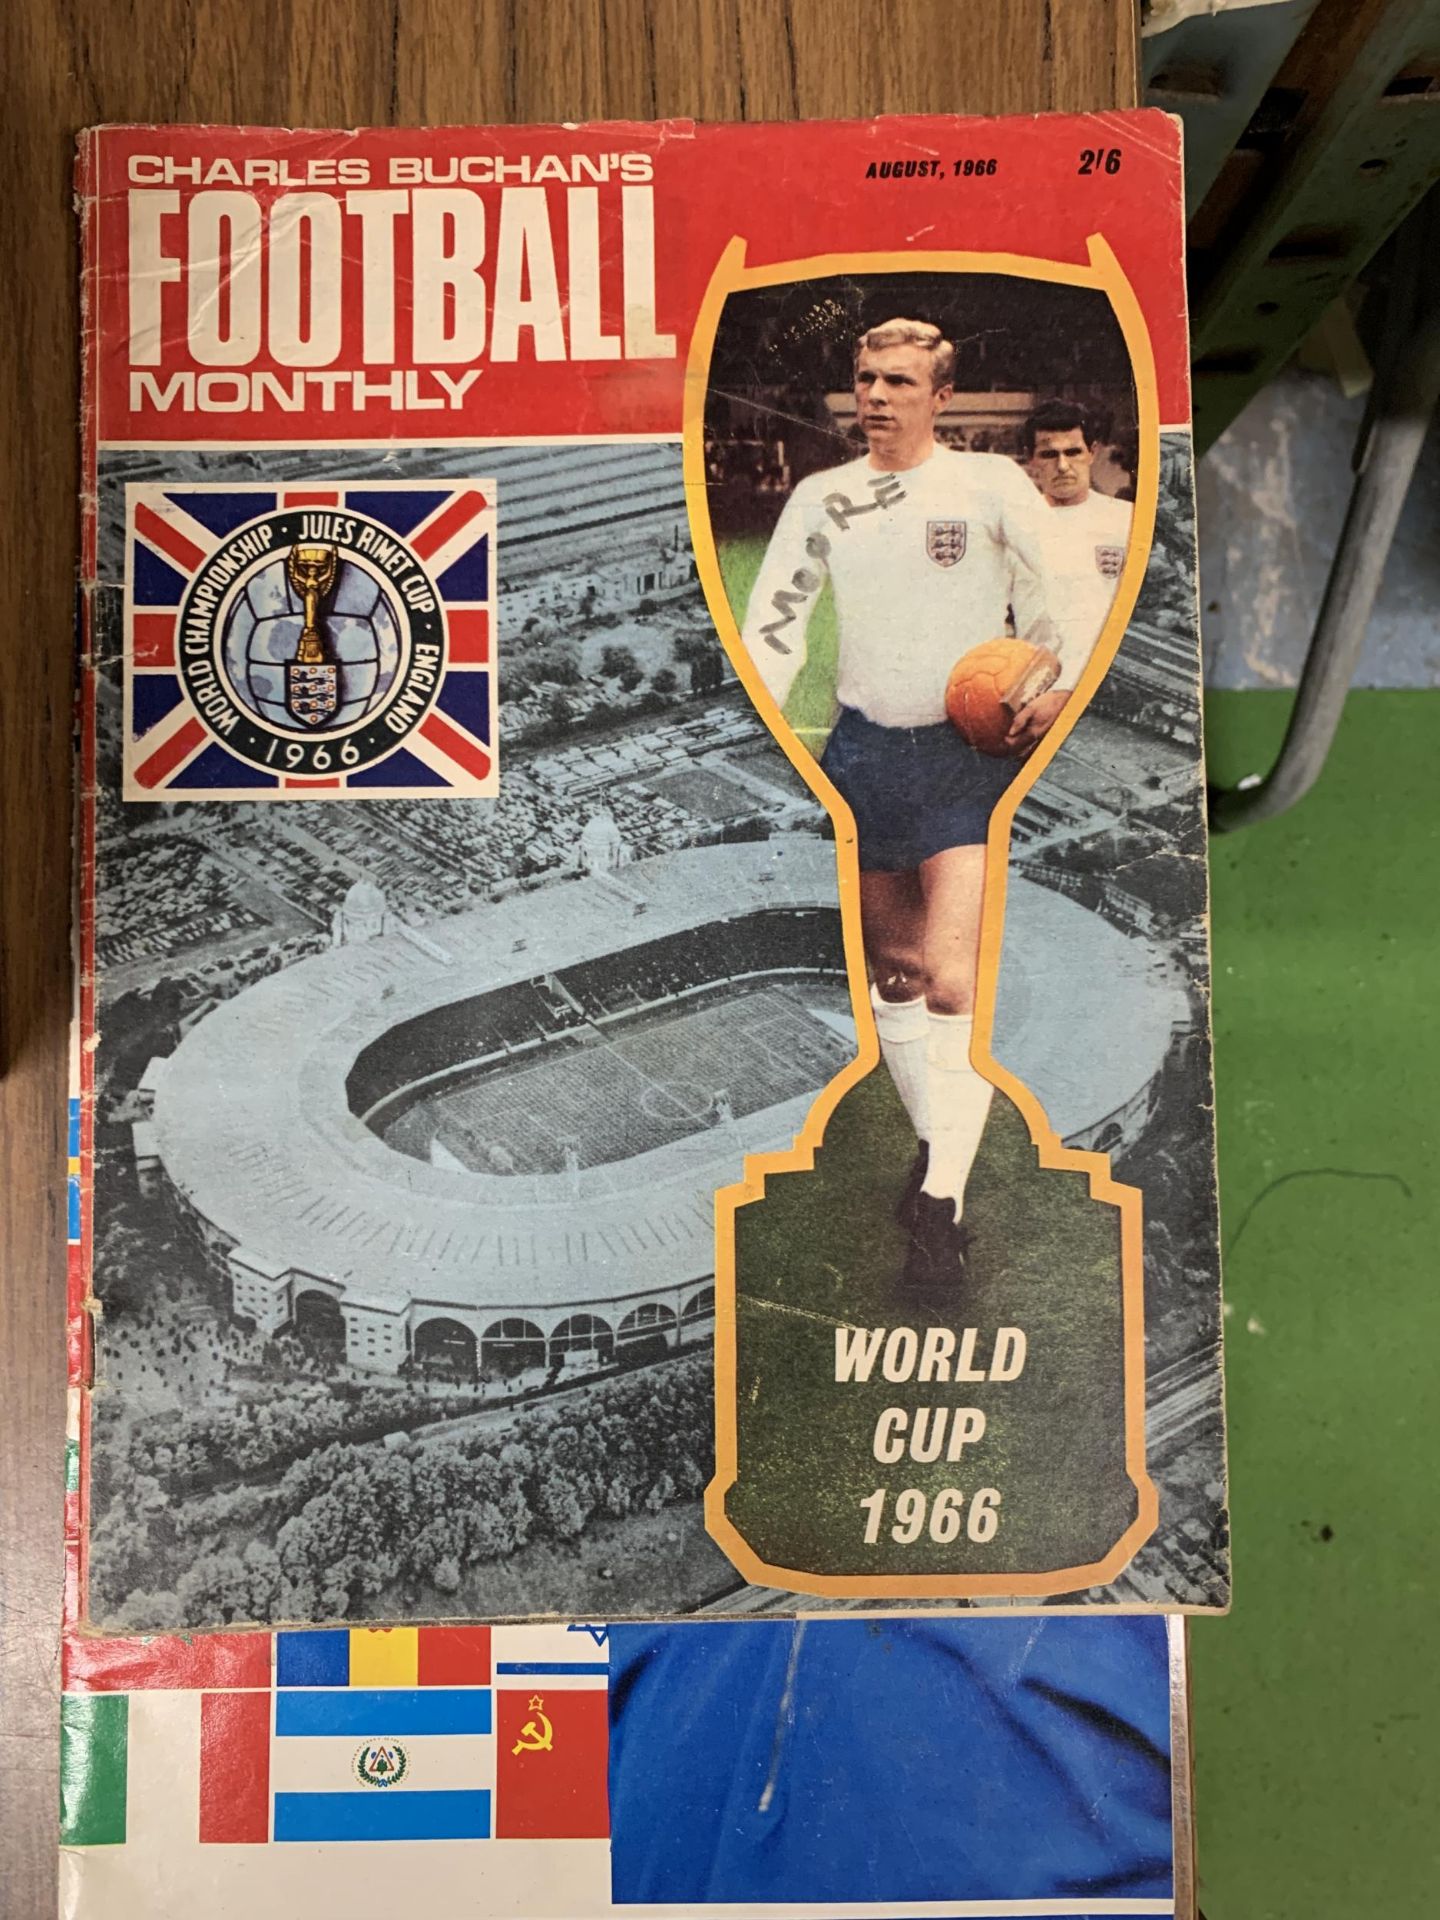 THREE 1966 WORLD CUP MAGAZINES TO INCLUDE PARK DRIVE, CHARLES BUCHAN AND MONTHLY FOOTBALL - Image 2 of 4